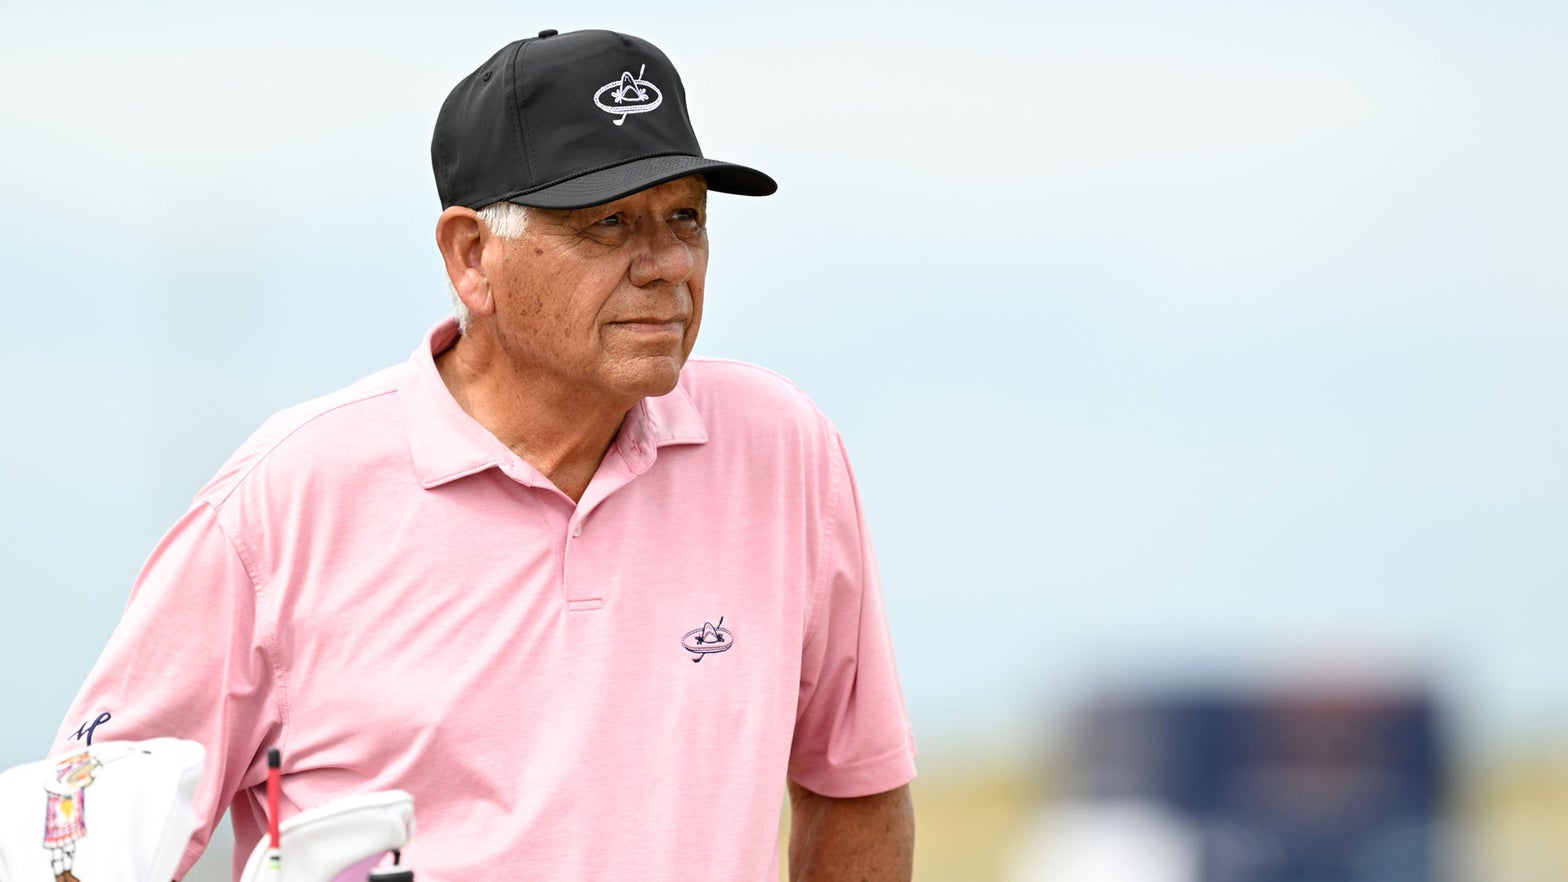 ‘The sails are going to damage on that send:’ Lee Trevino opens up on LIV